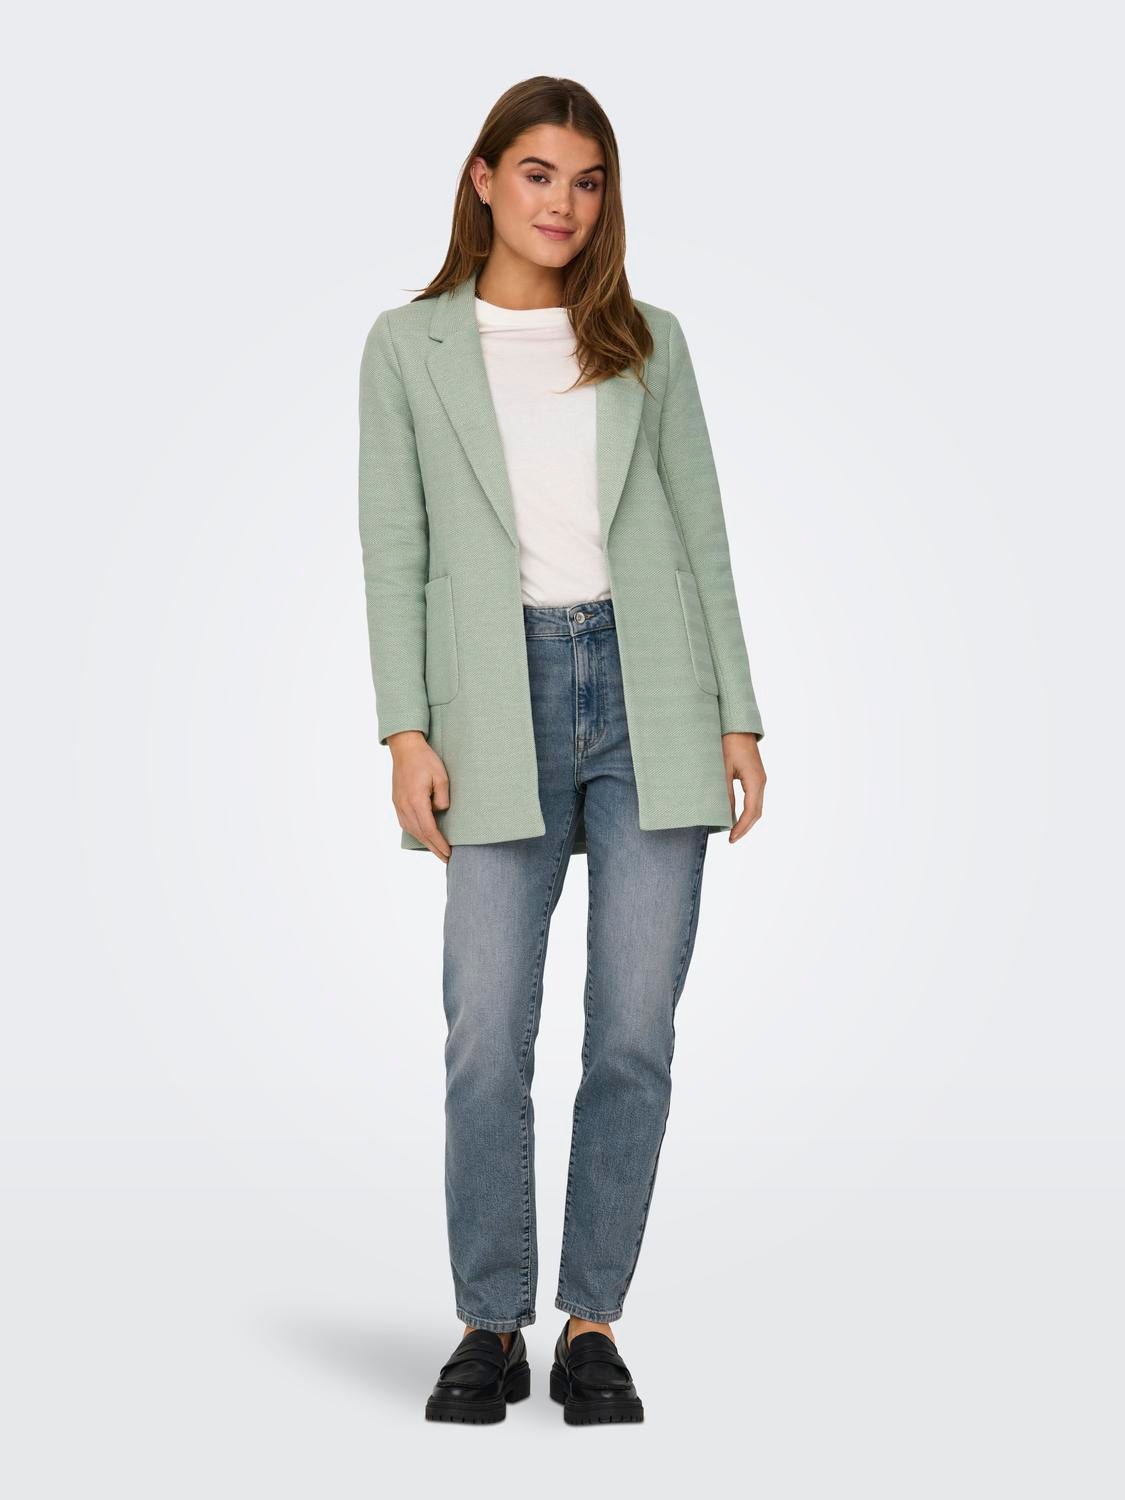 ONLY Blazers Regular Fit Revers à encoche -Lily Pad - 15218396